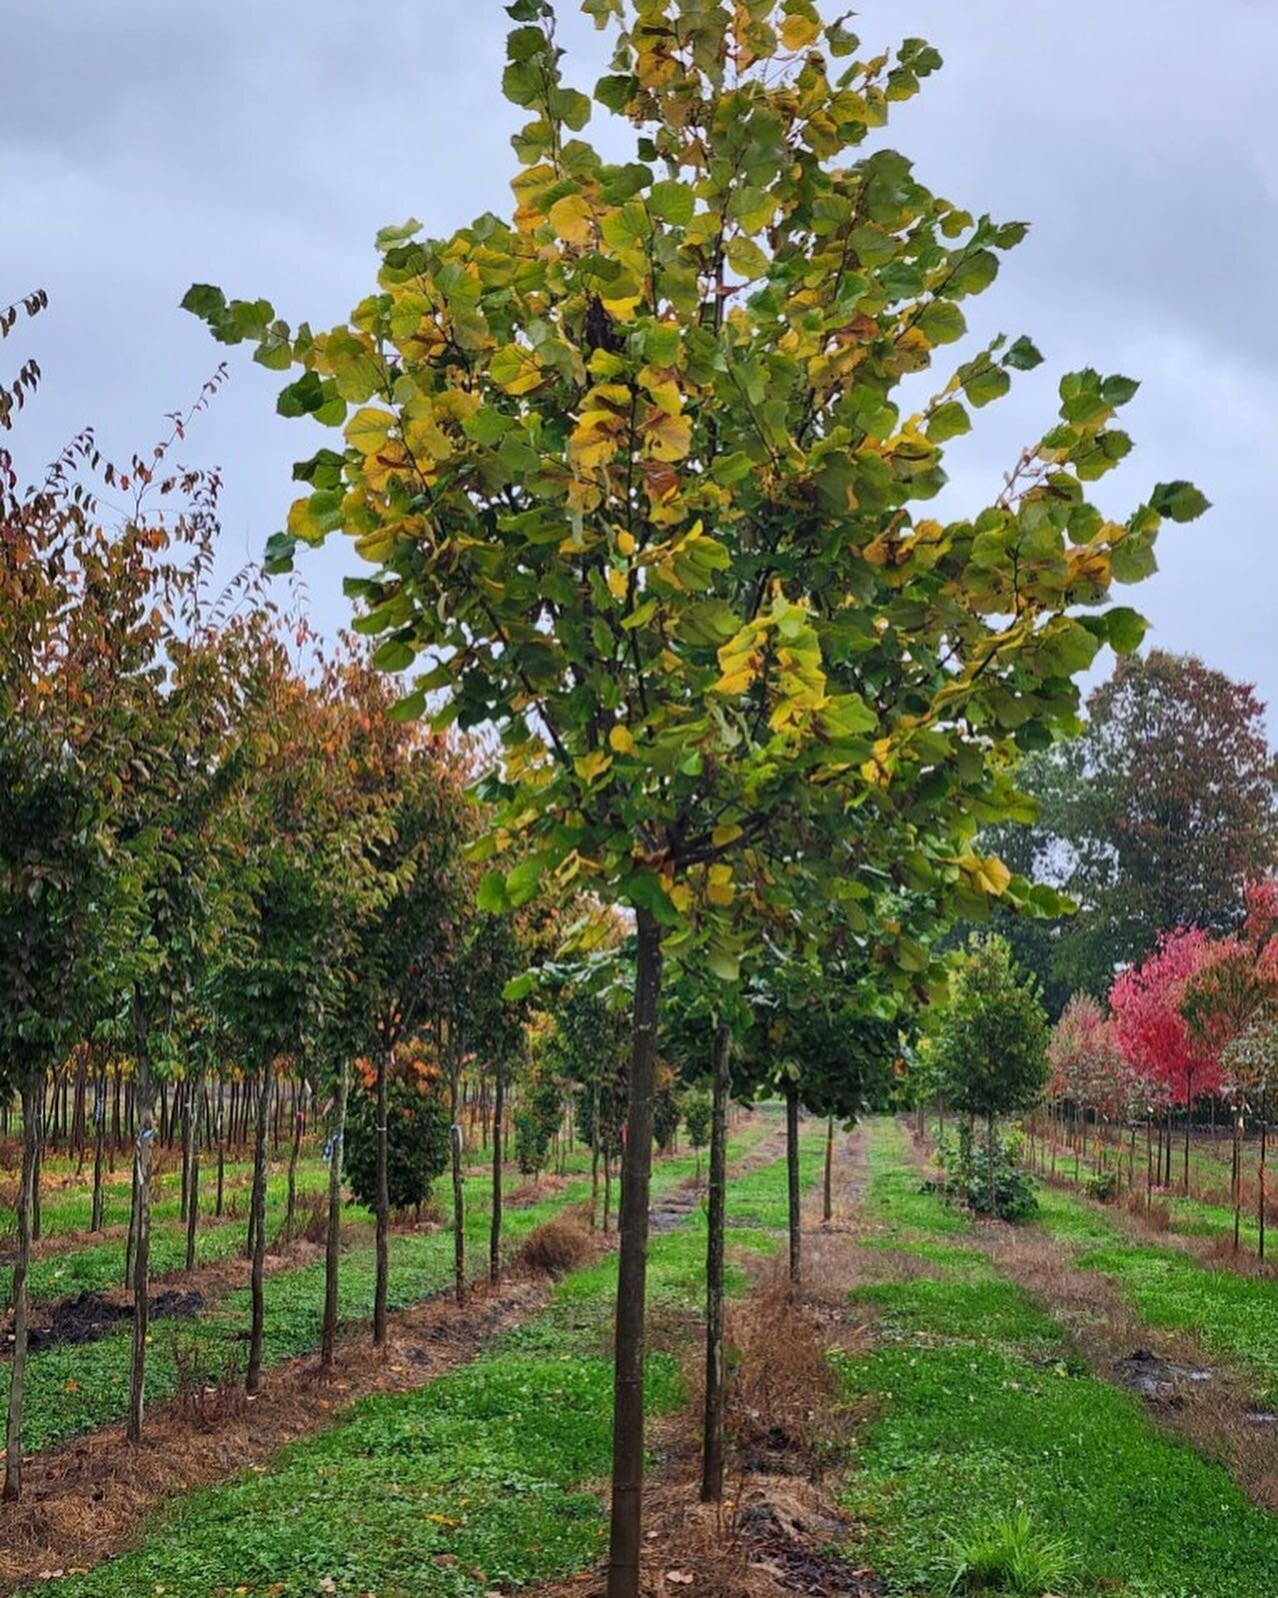 Did you know trees improve productivity, creativity, quality of life, and physical and mental health? We can help you choose the right trees for your home and care for them. After all - a healthy tree makes for a healthy life! #seatosky #landscapedes